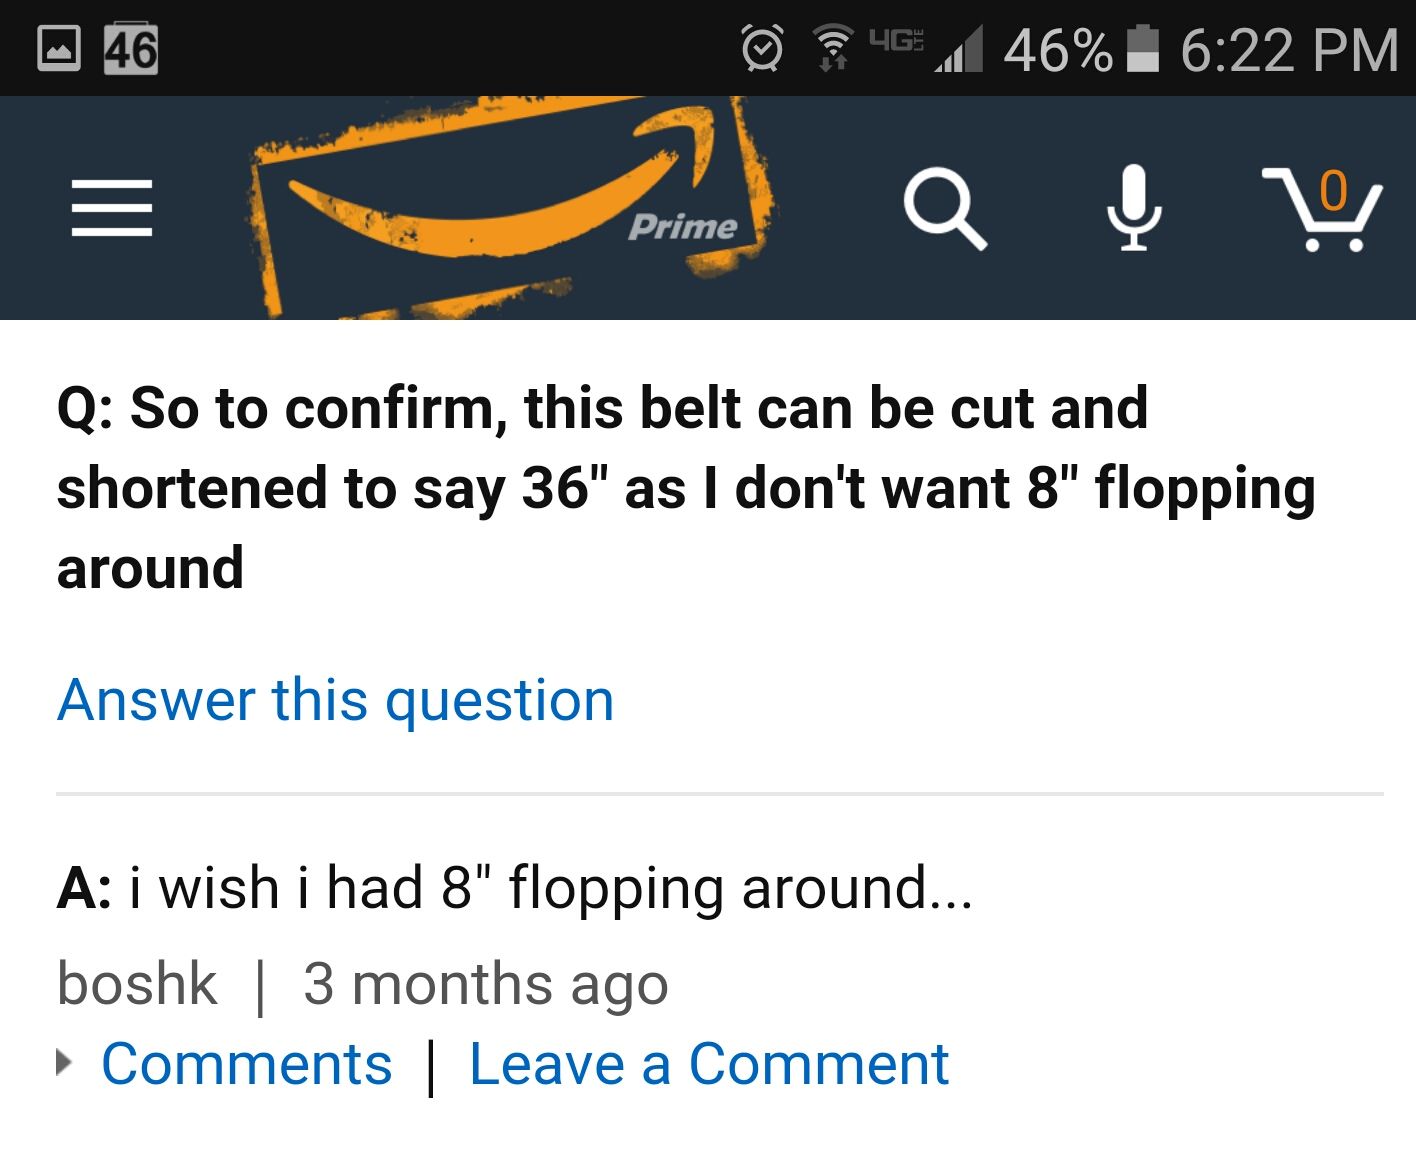 Saw an honest question on Amazon